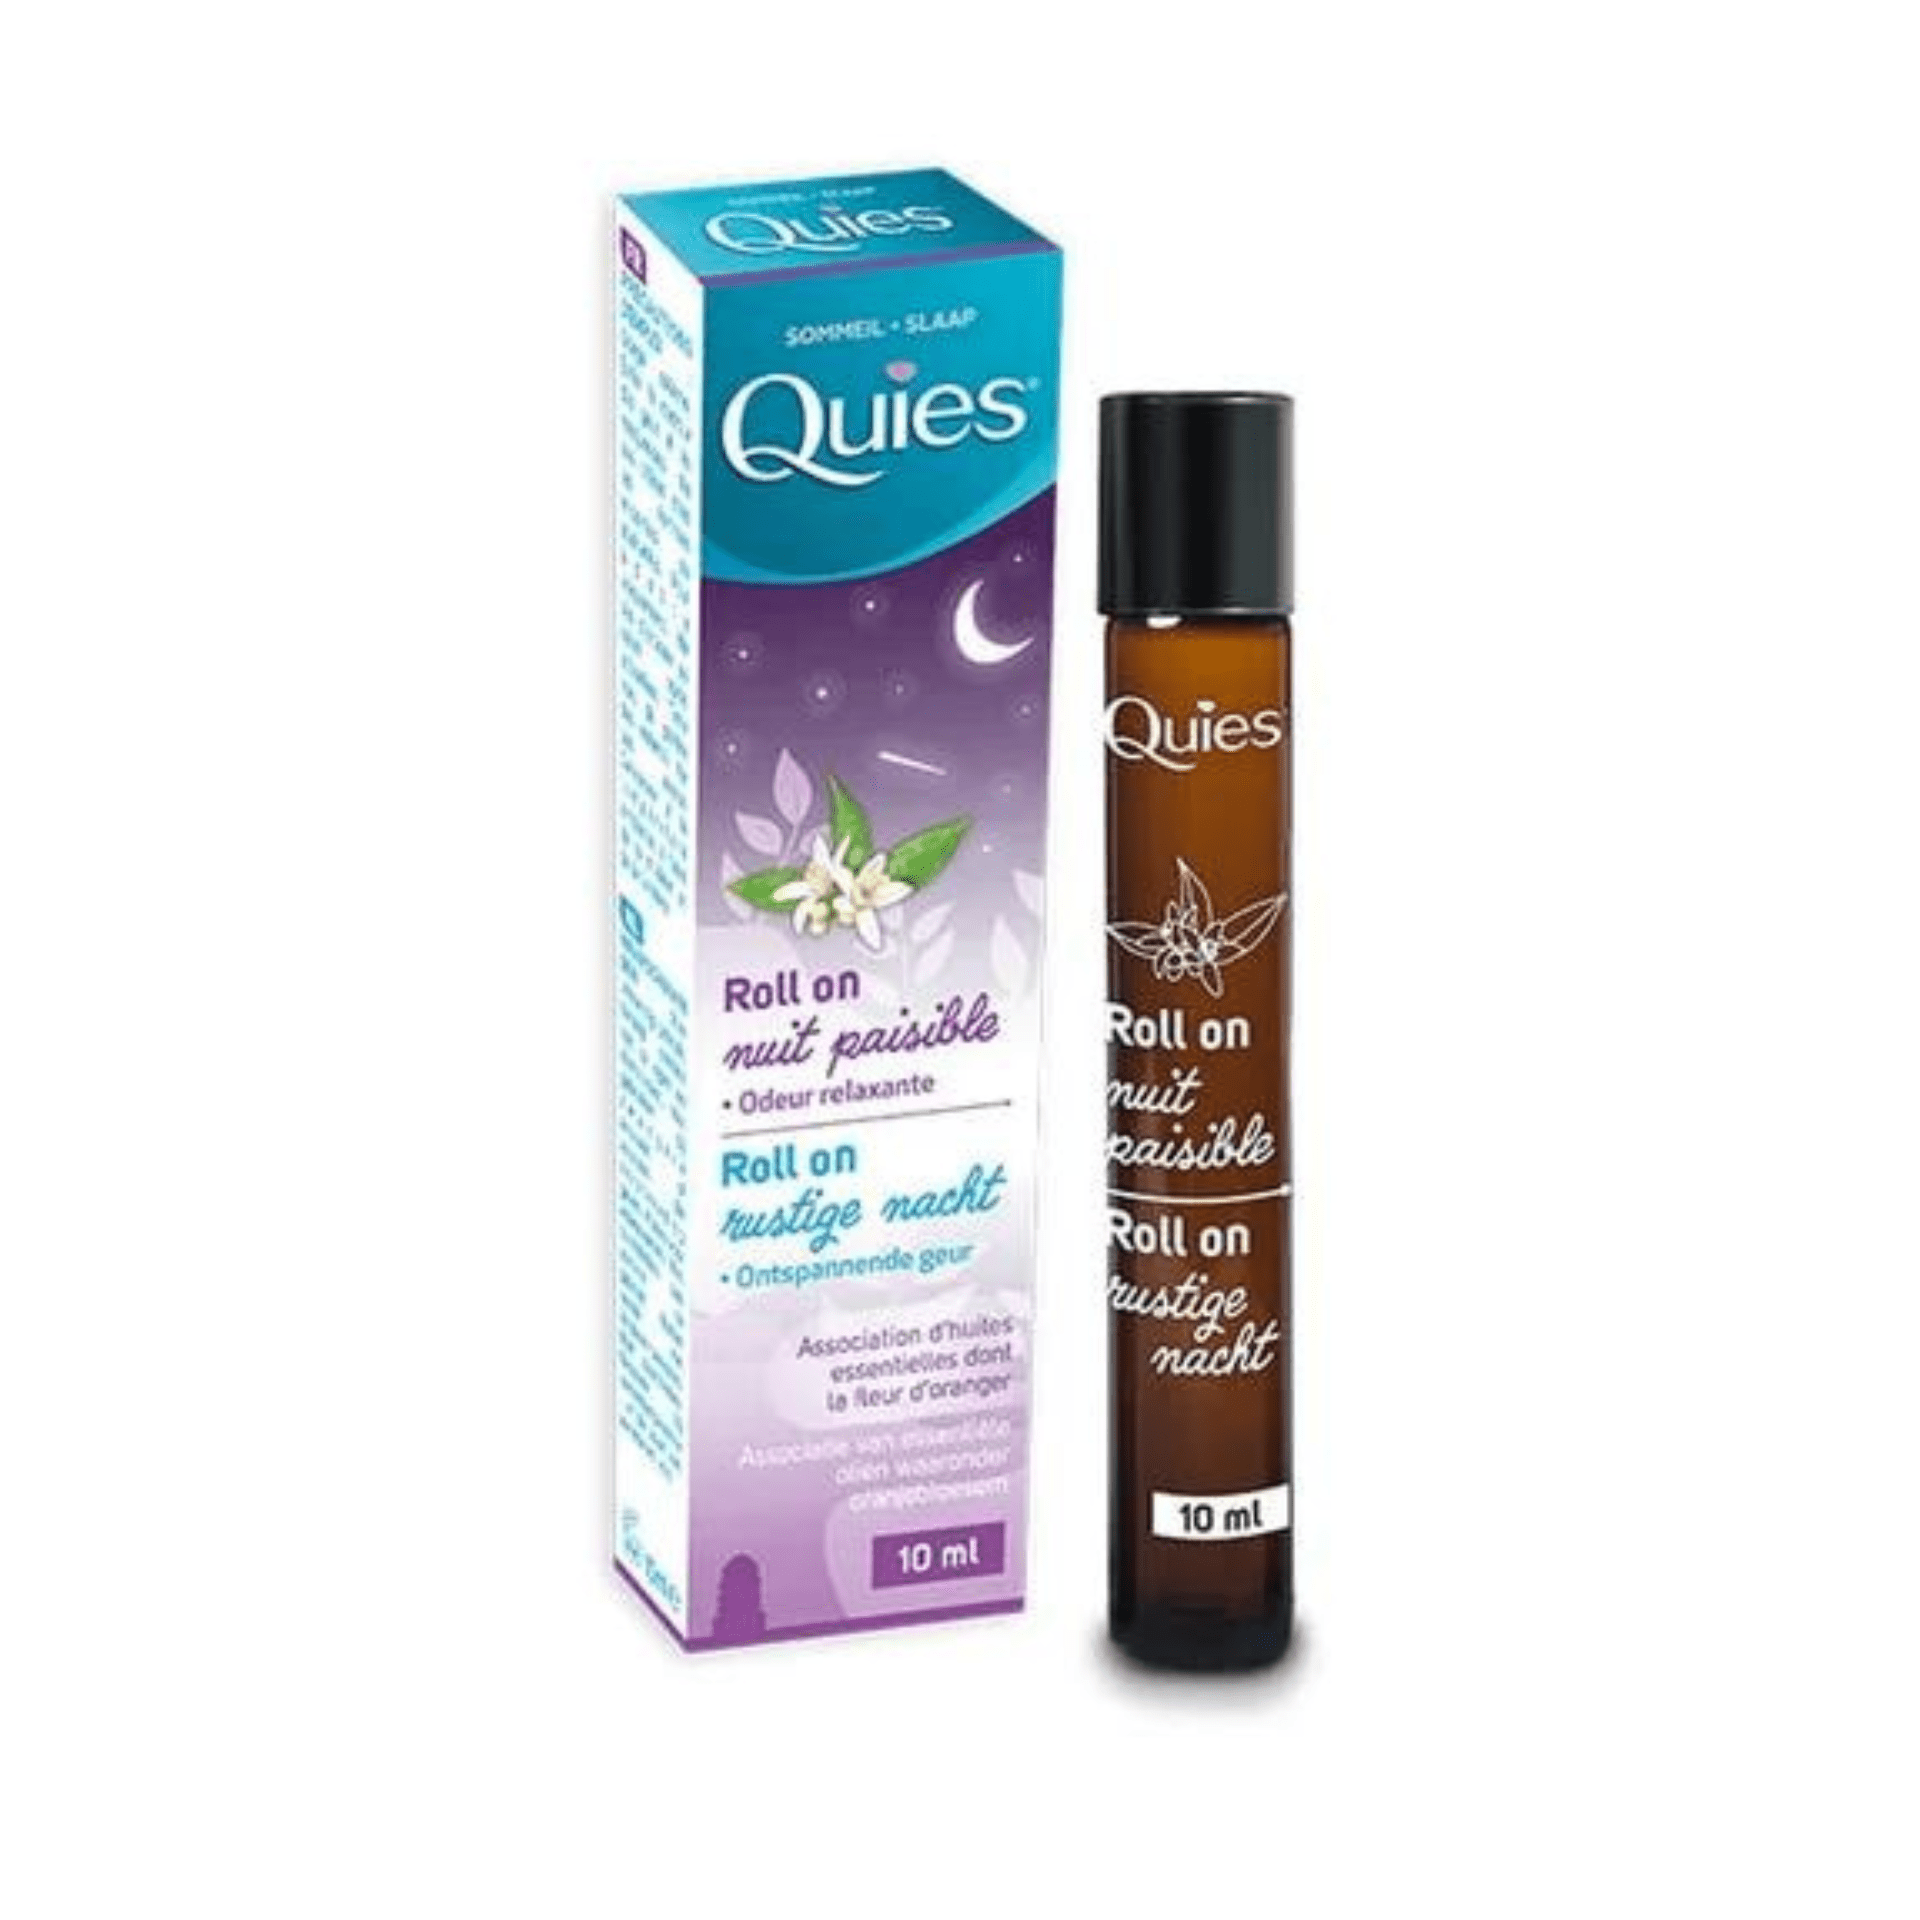 Quies Roll-on Nuit Paisible 10ml